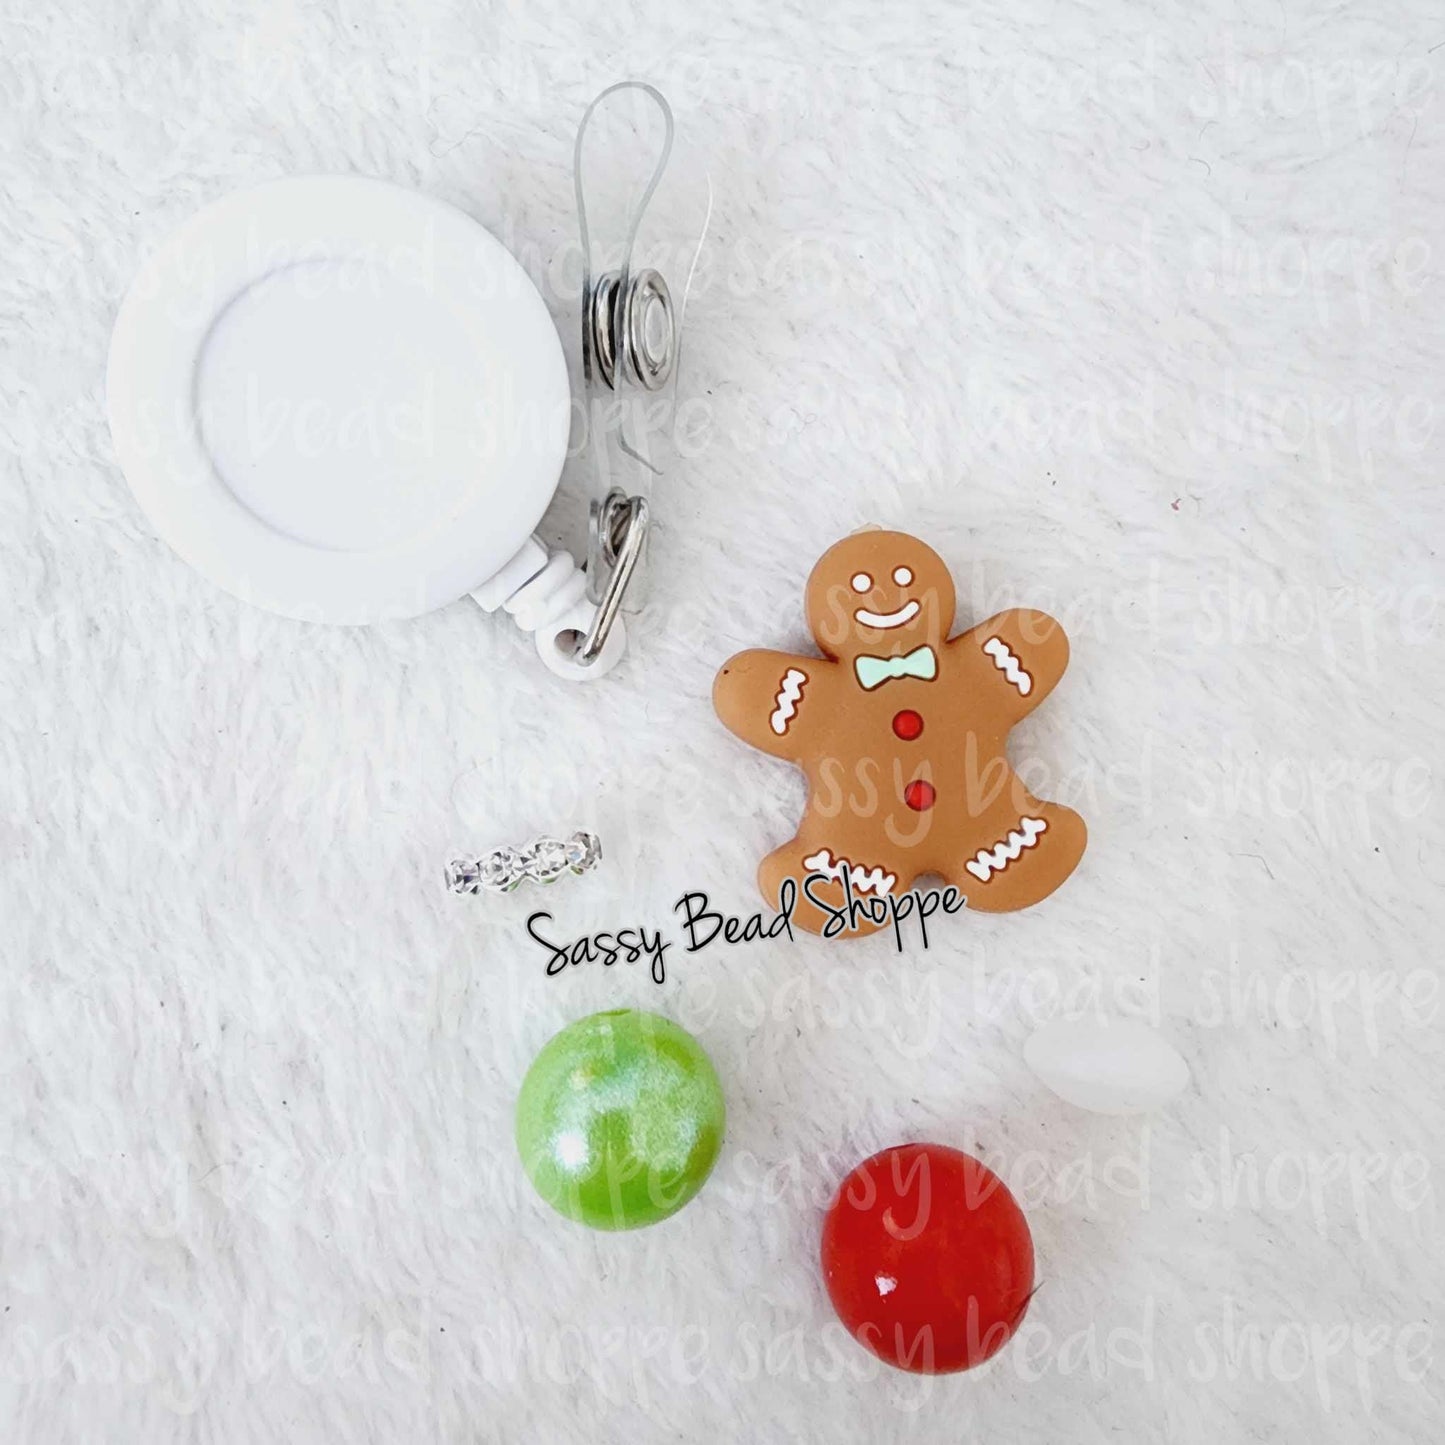 Sassy Bead Shoppe Christmas Cheer Badge Reel What you will receive in your kit